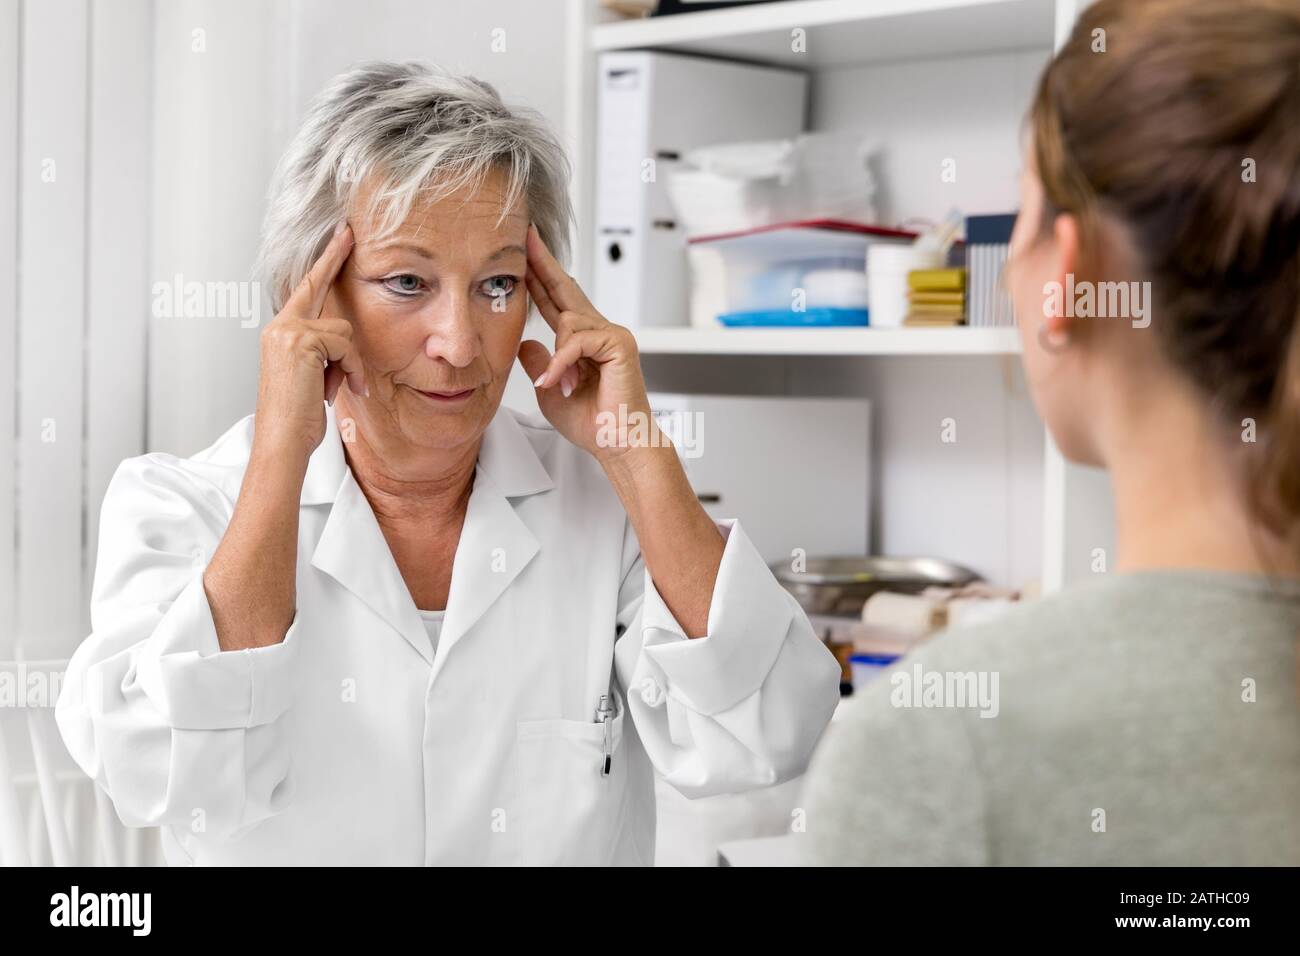 Female doctor holding her temporal, demonstration of headache or neuralgia pain, medical office Stock Photo